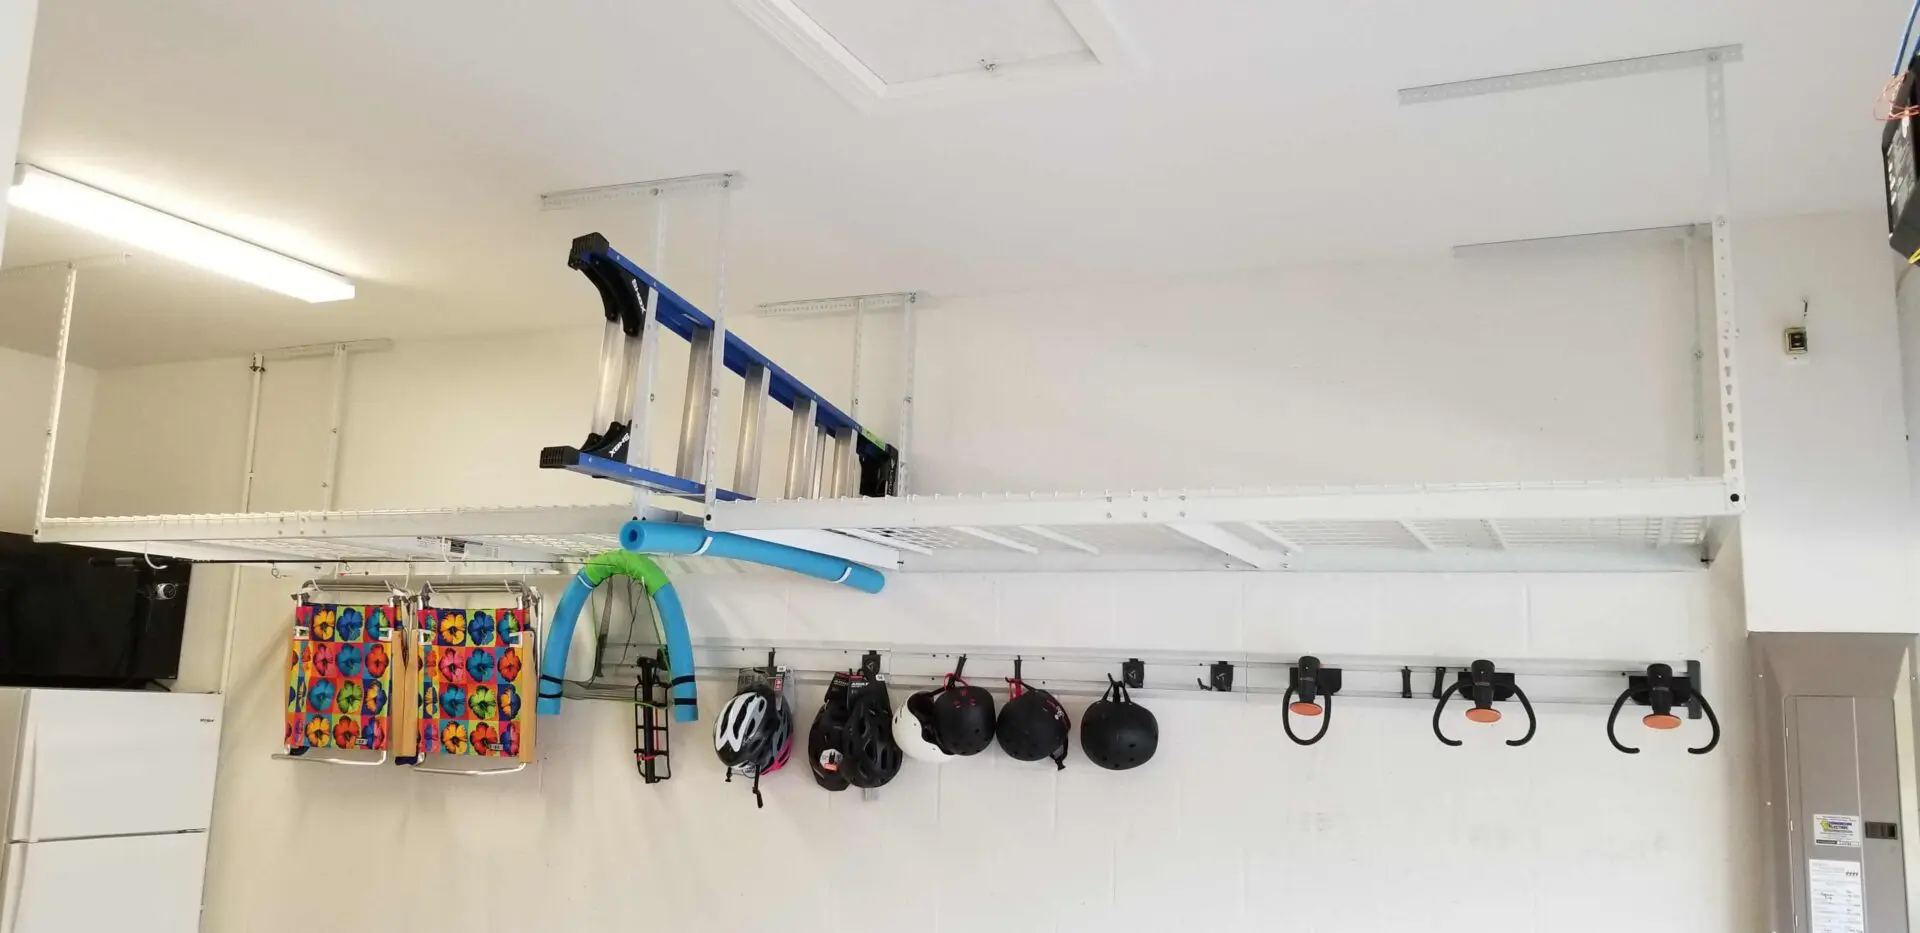 A ladder on the overhead storage and helmets on the hooks